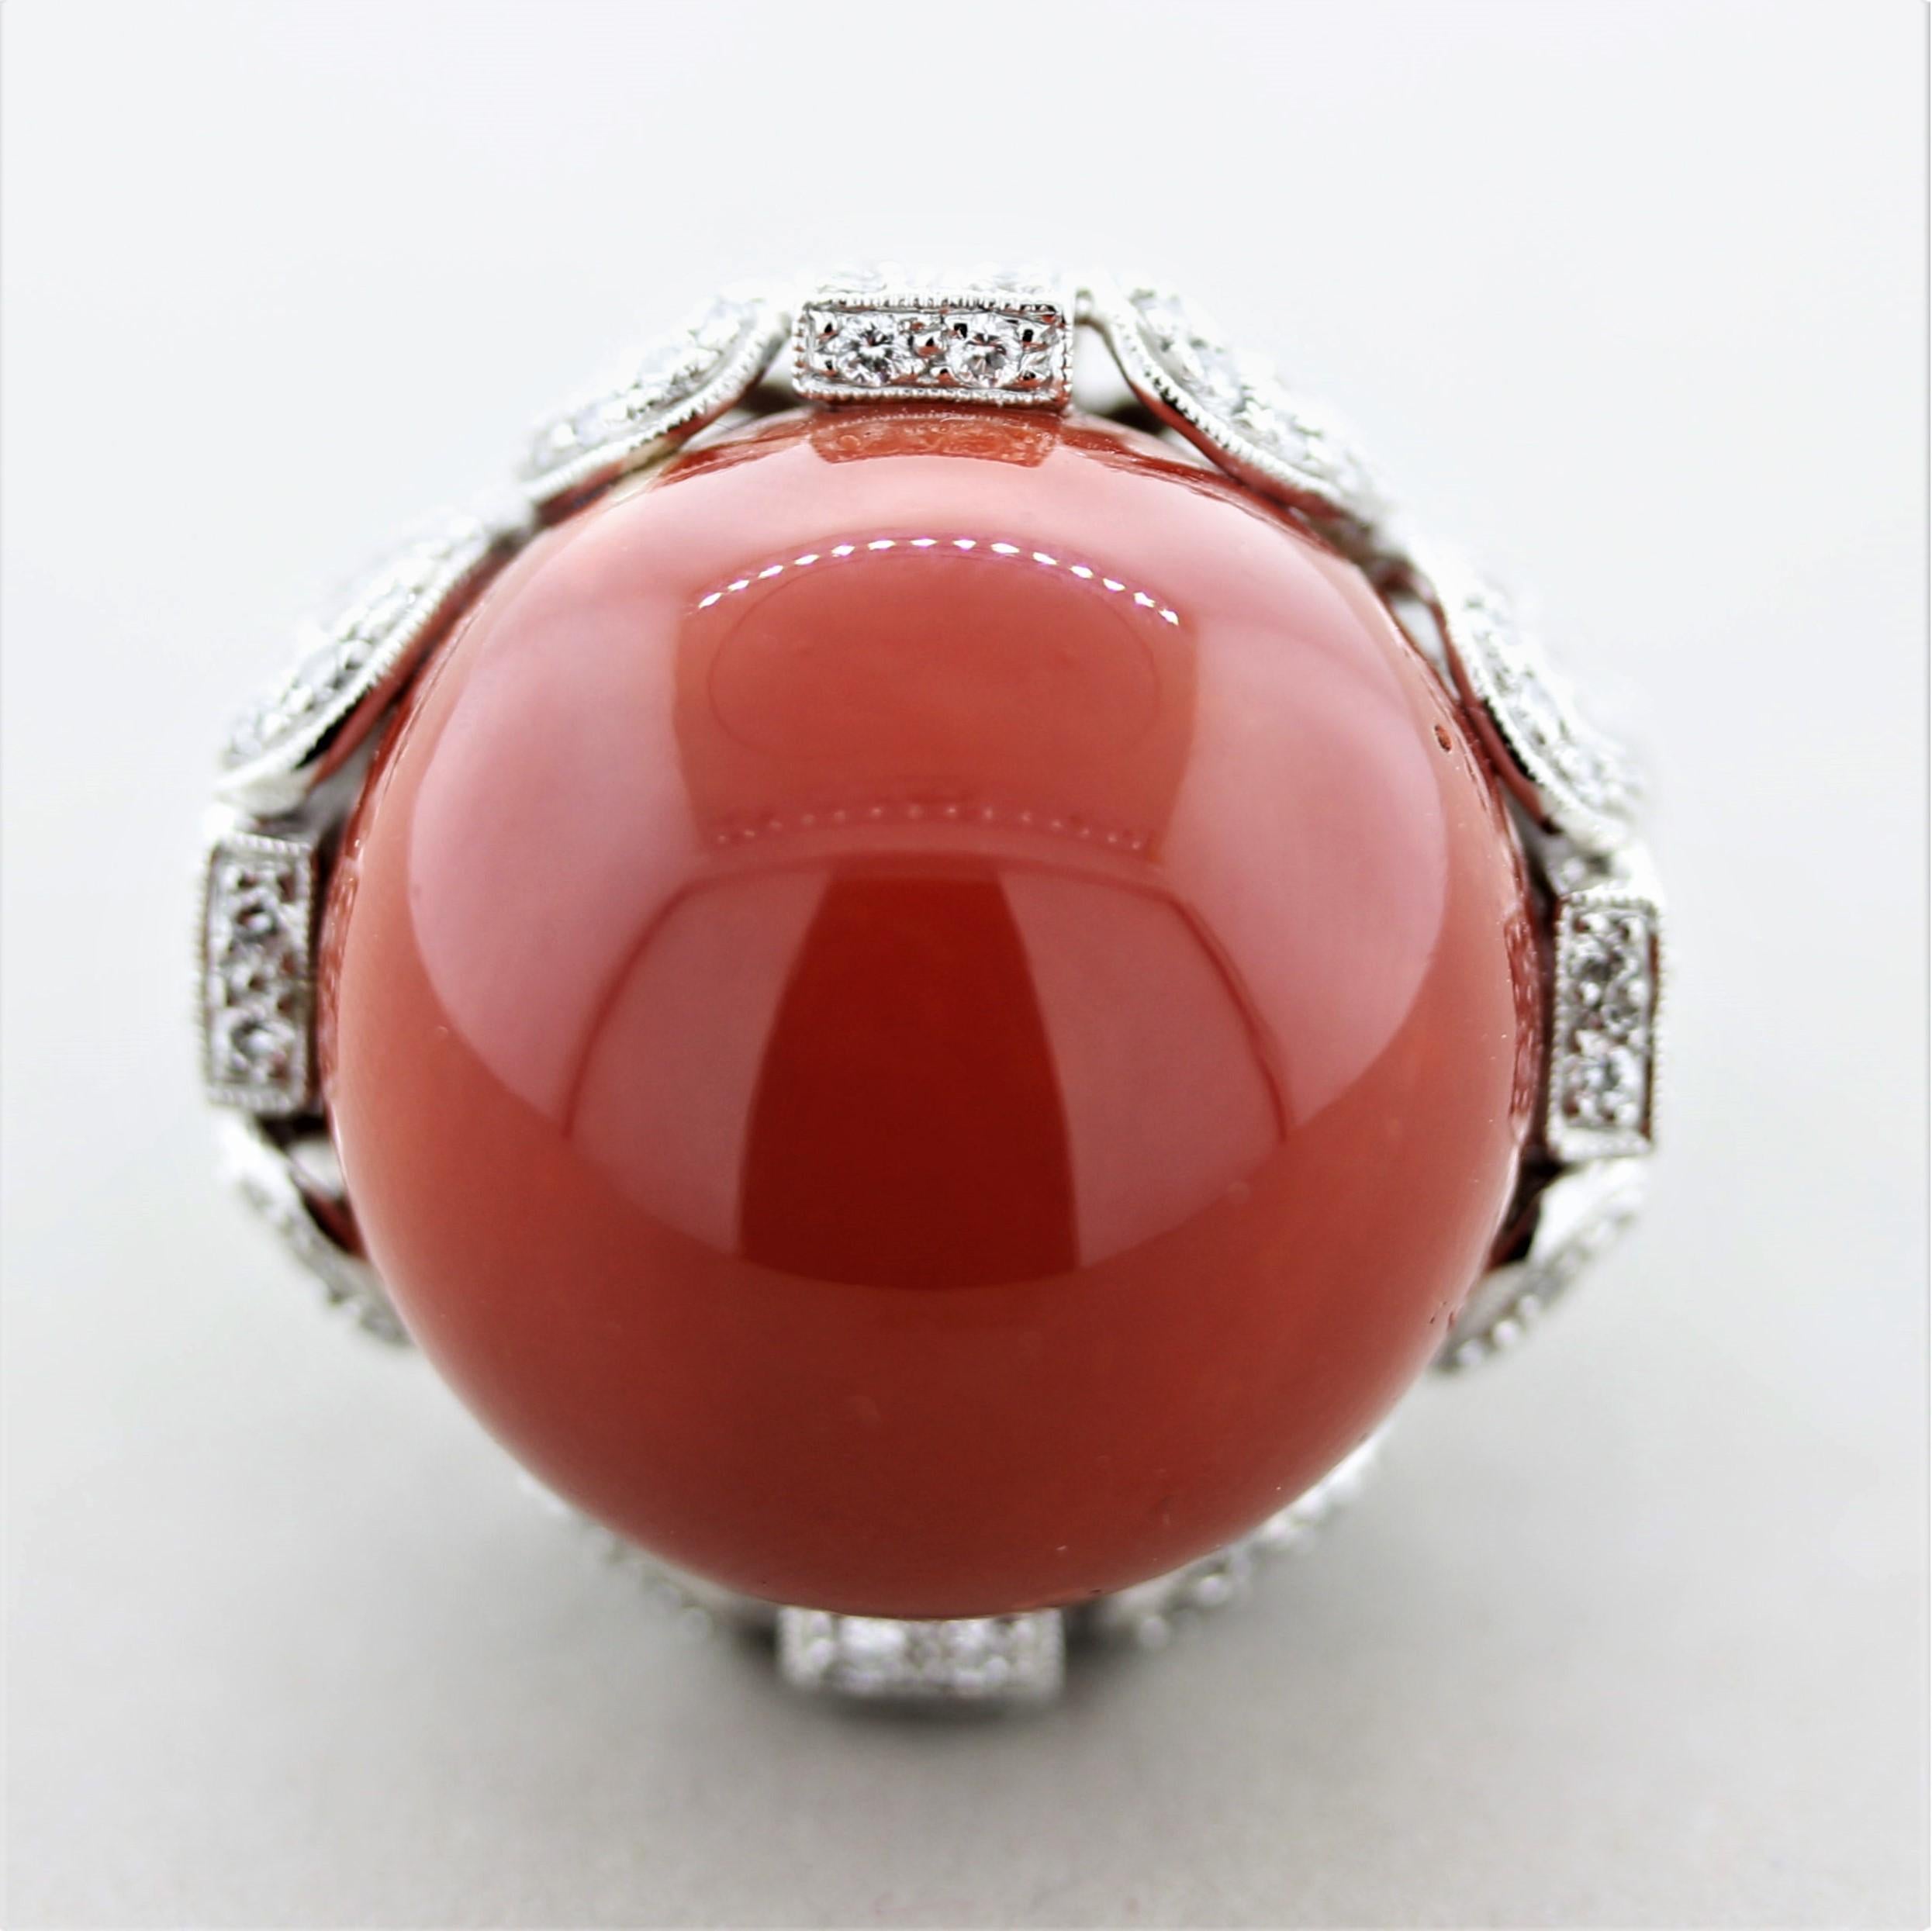 A large and important piece of natural coral is featured in this big and bold ring. The red coral measures 22.3 millimeters which is extremely rare and sought after. It takes over 50 years for coral to grow this size and unfortunately wild coral